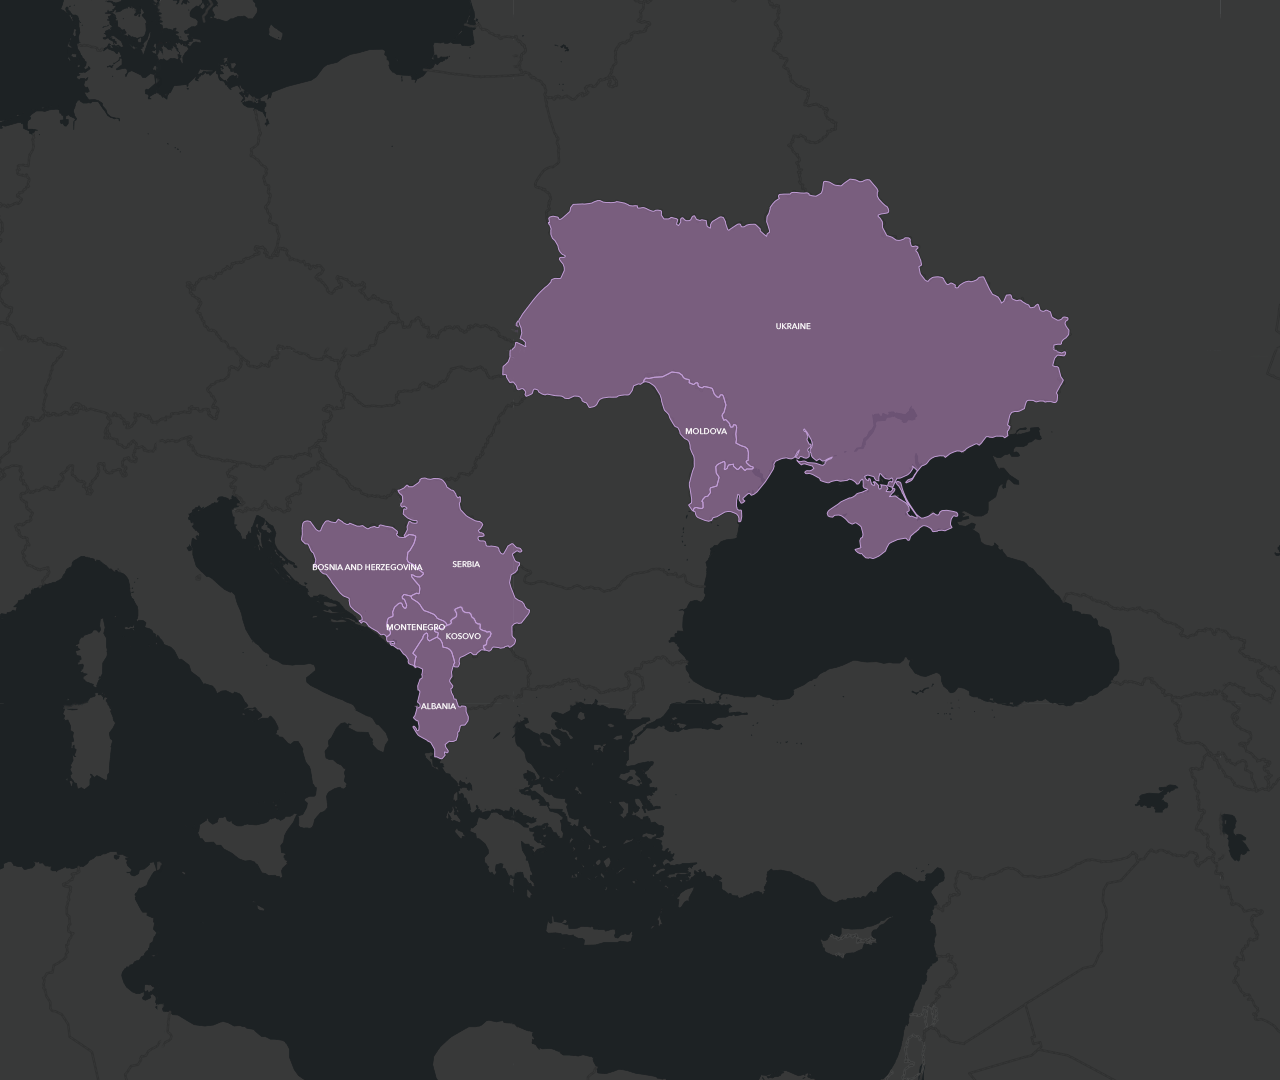 Map of Europe in dull lavender on a dark gray background with countries outlined and labeled in white